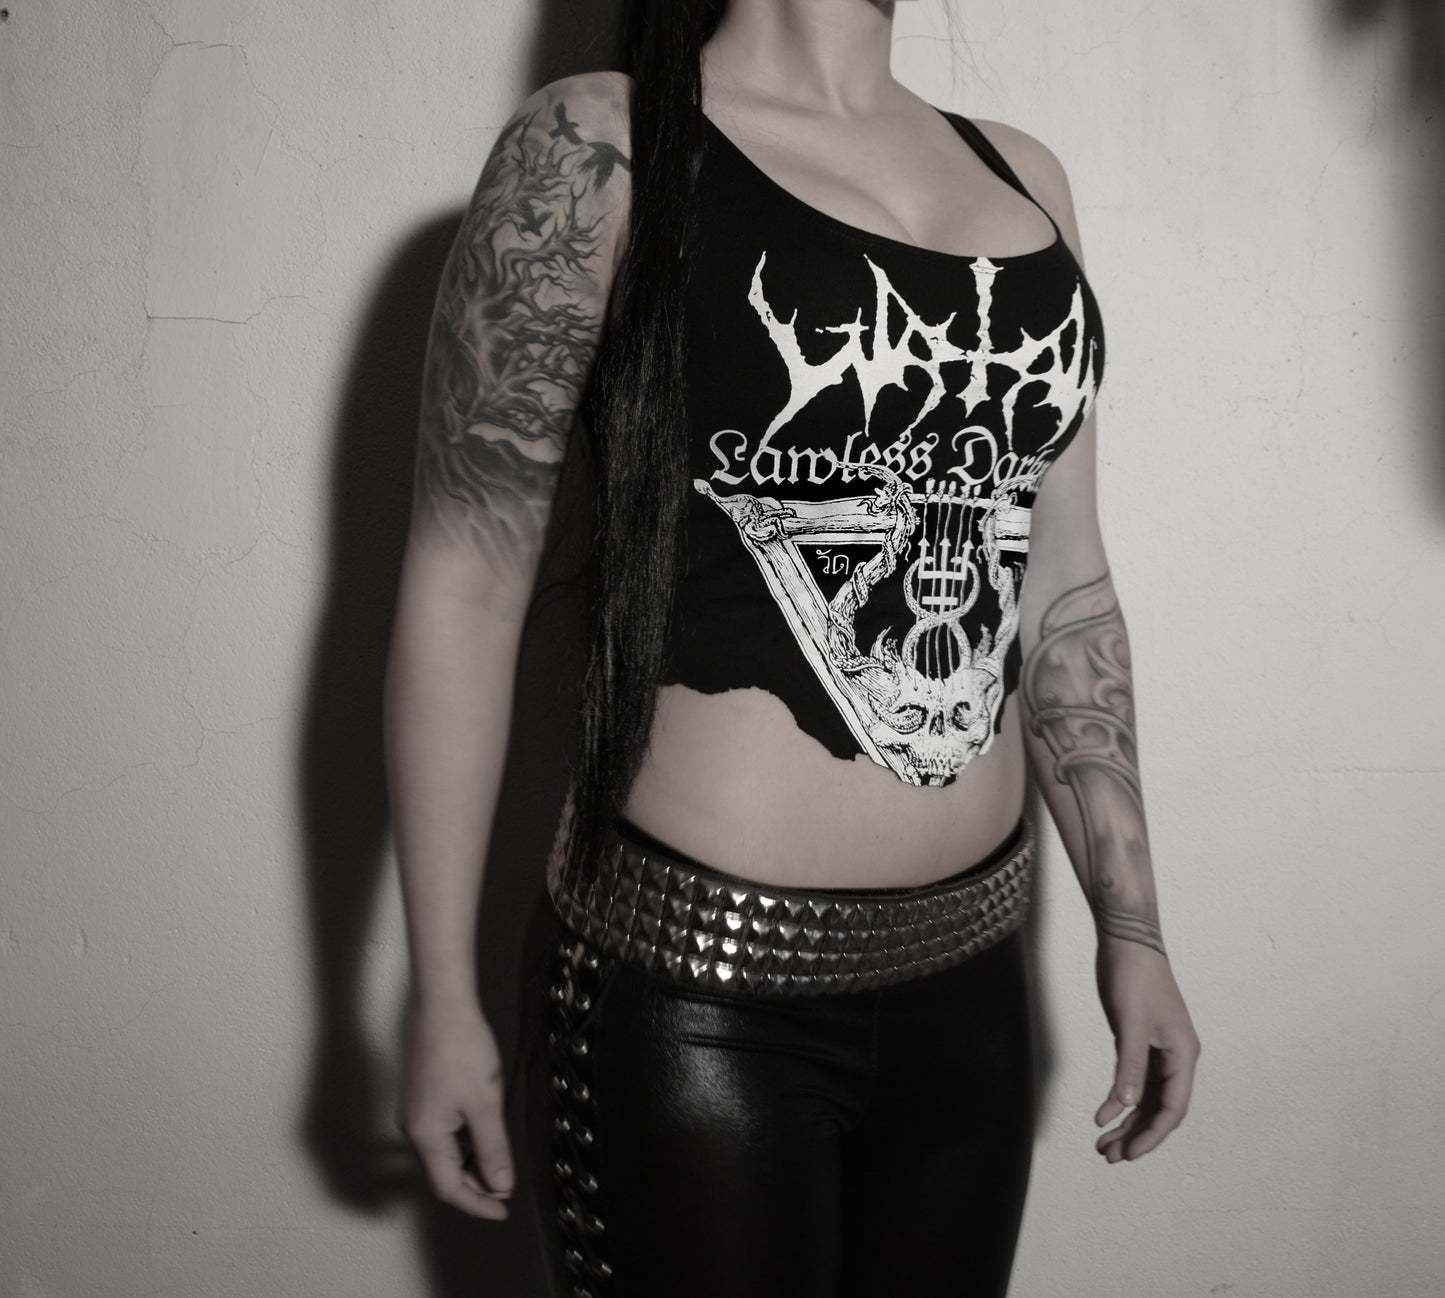 WATAIN Cropped ⇹ Watain Lawless Darkness ⇹ black metal Cropped